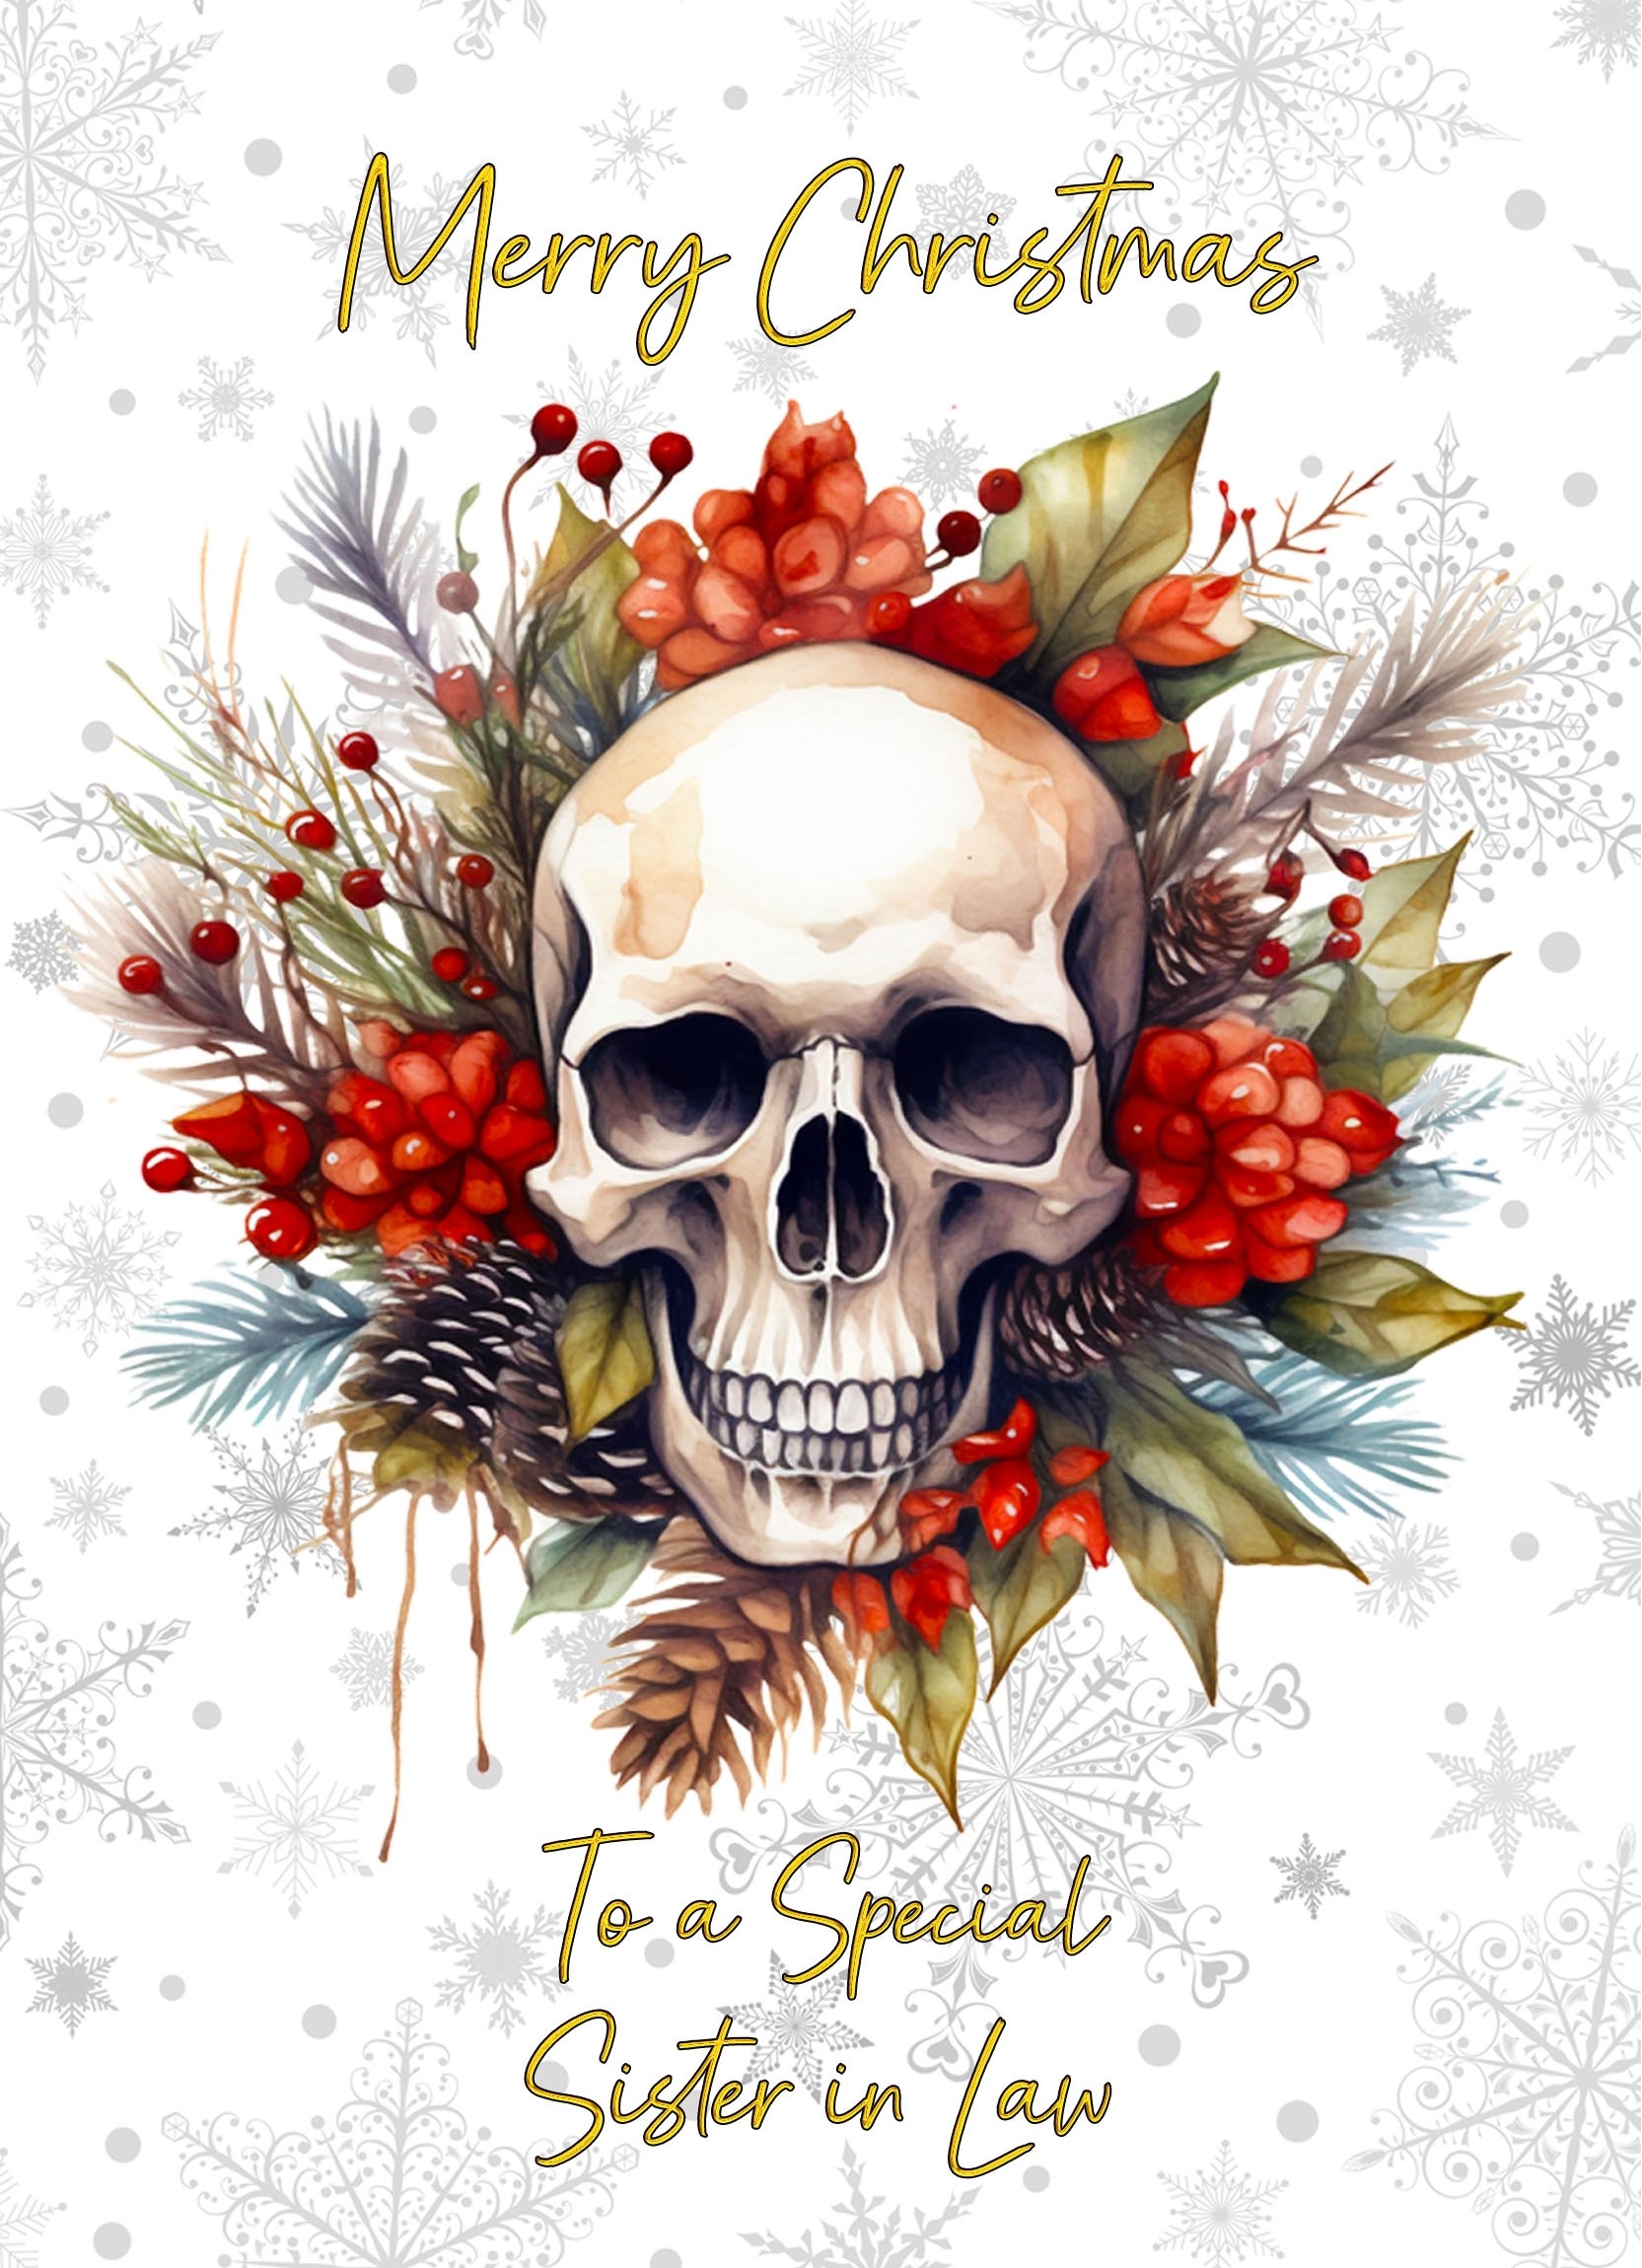 Christmas Card For Sister in Law (Gothic Fantasy Skull Wreath)